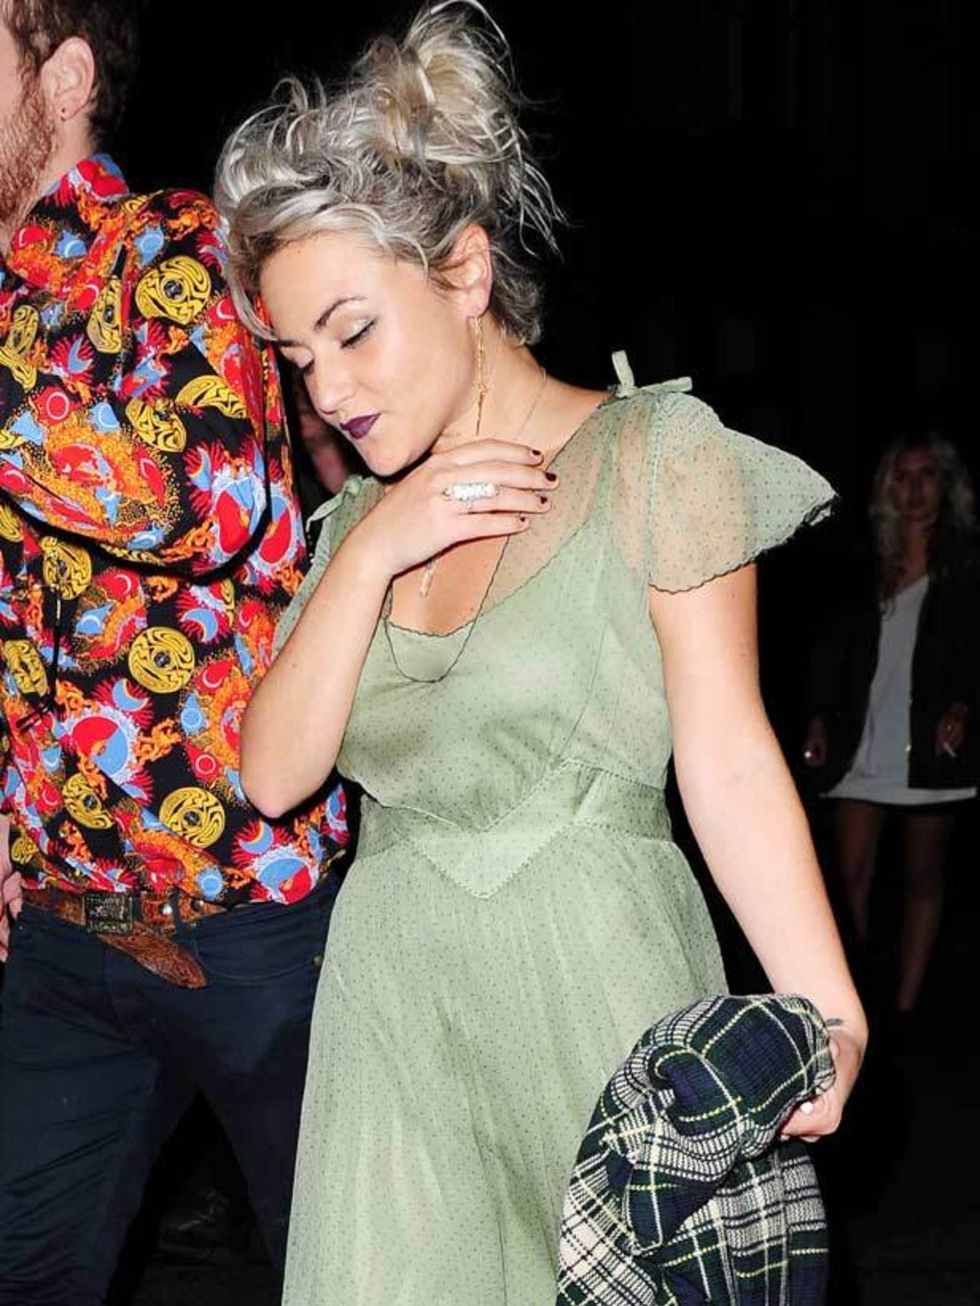 <p><a href="http://www.elleuk.com/starstyle/style-files/(section)/Jaime-Winstone">Jaime Winstone</a> leaves Asprey House in a vintage number after celebrating Stella McCartney's 40th Birthday, 13 September 2011</p>